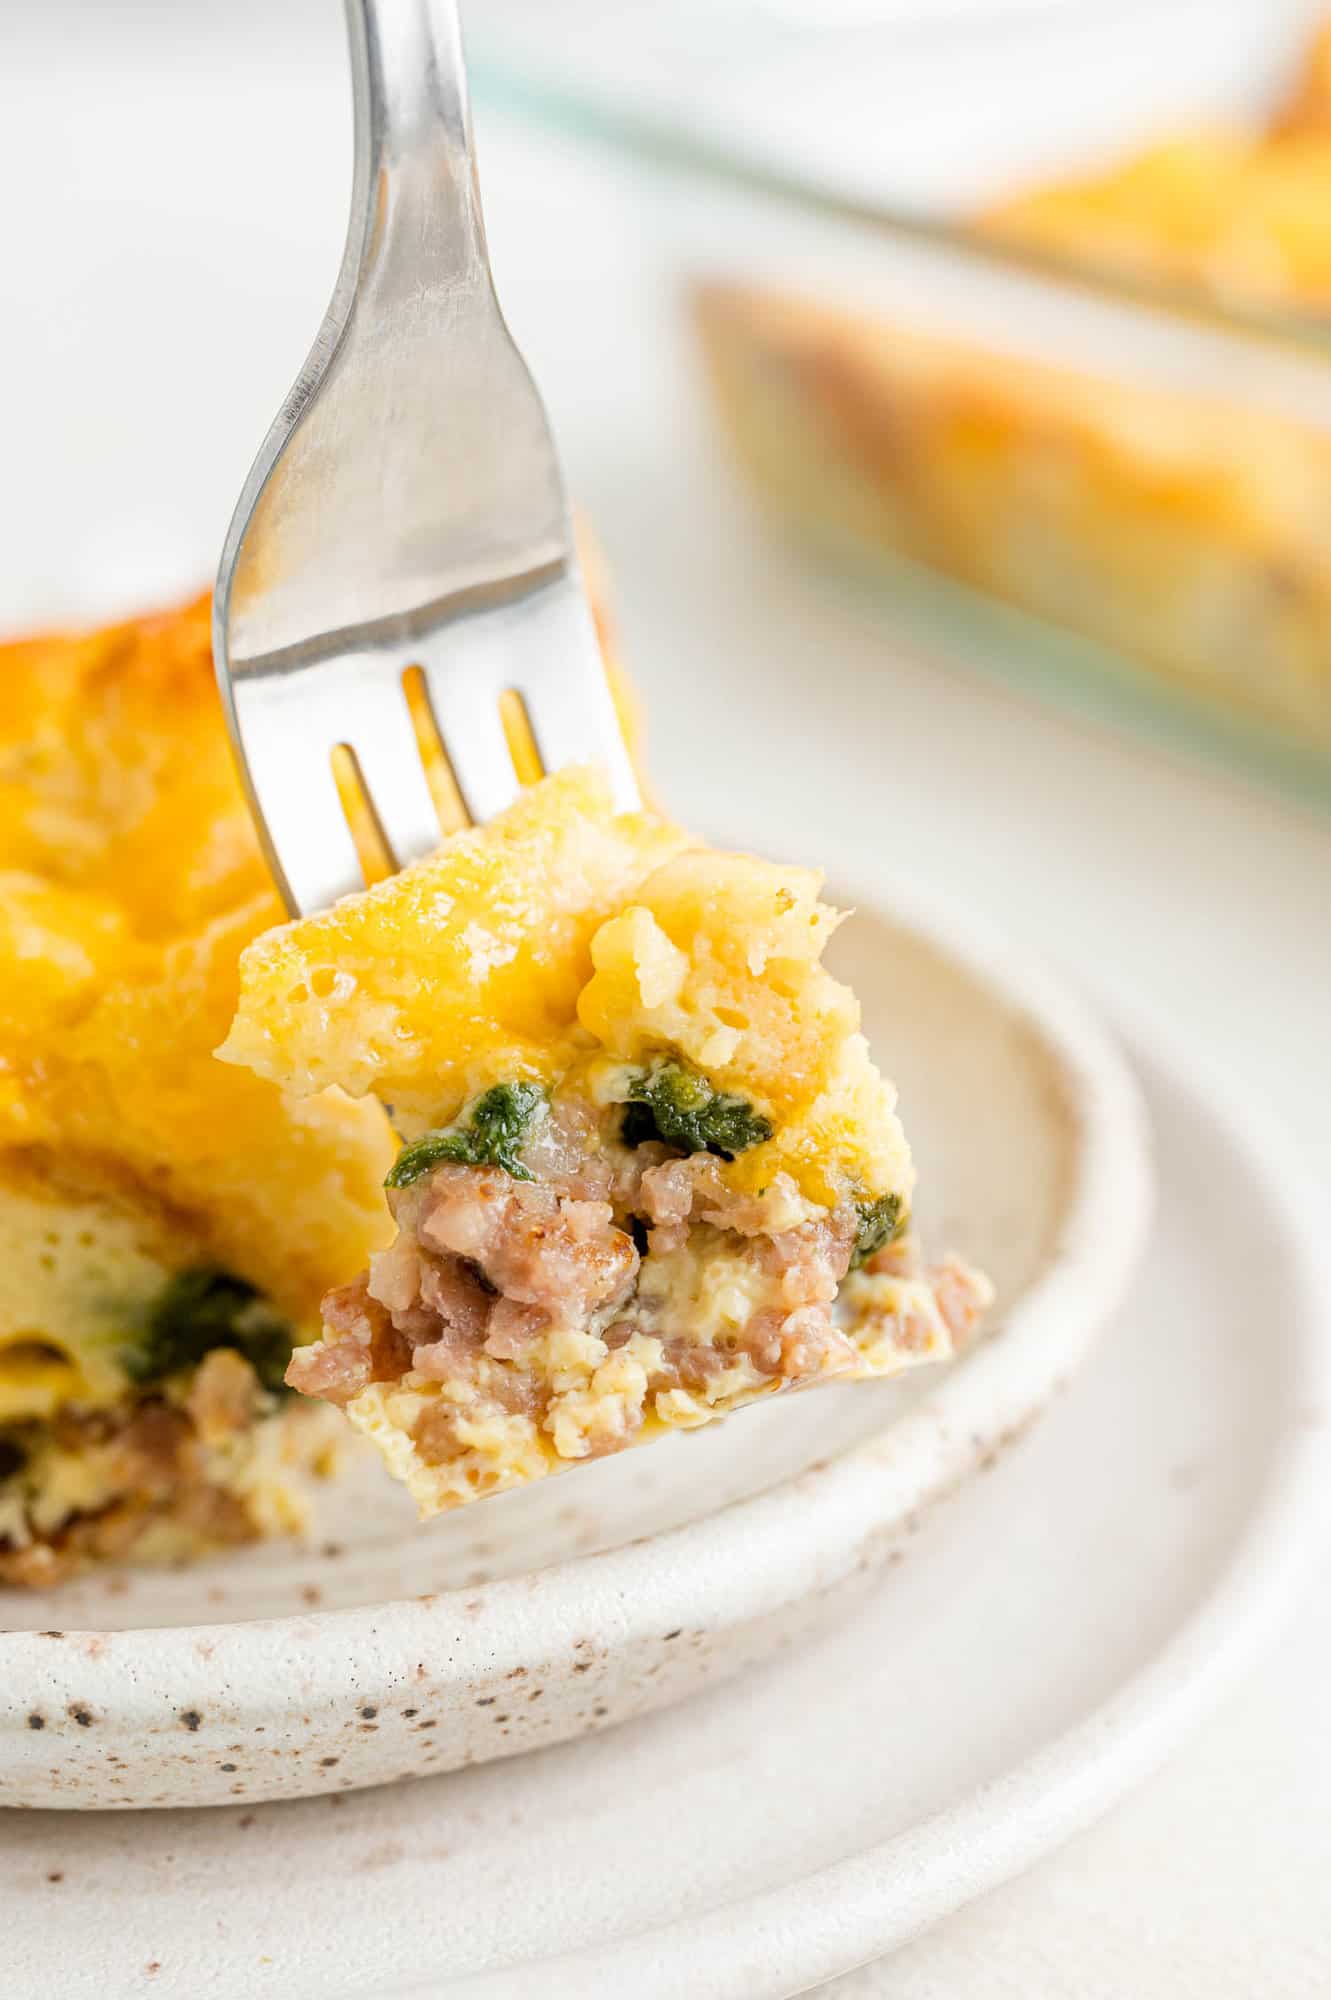 Fork cutting into a square of breakfast casserole.